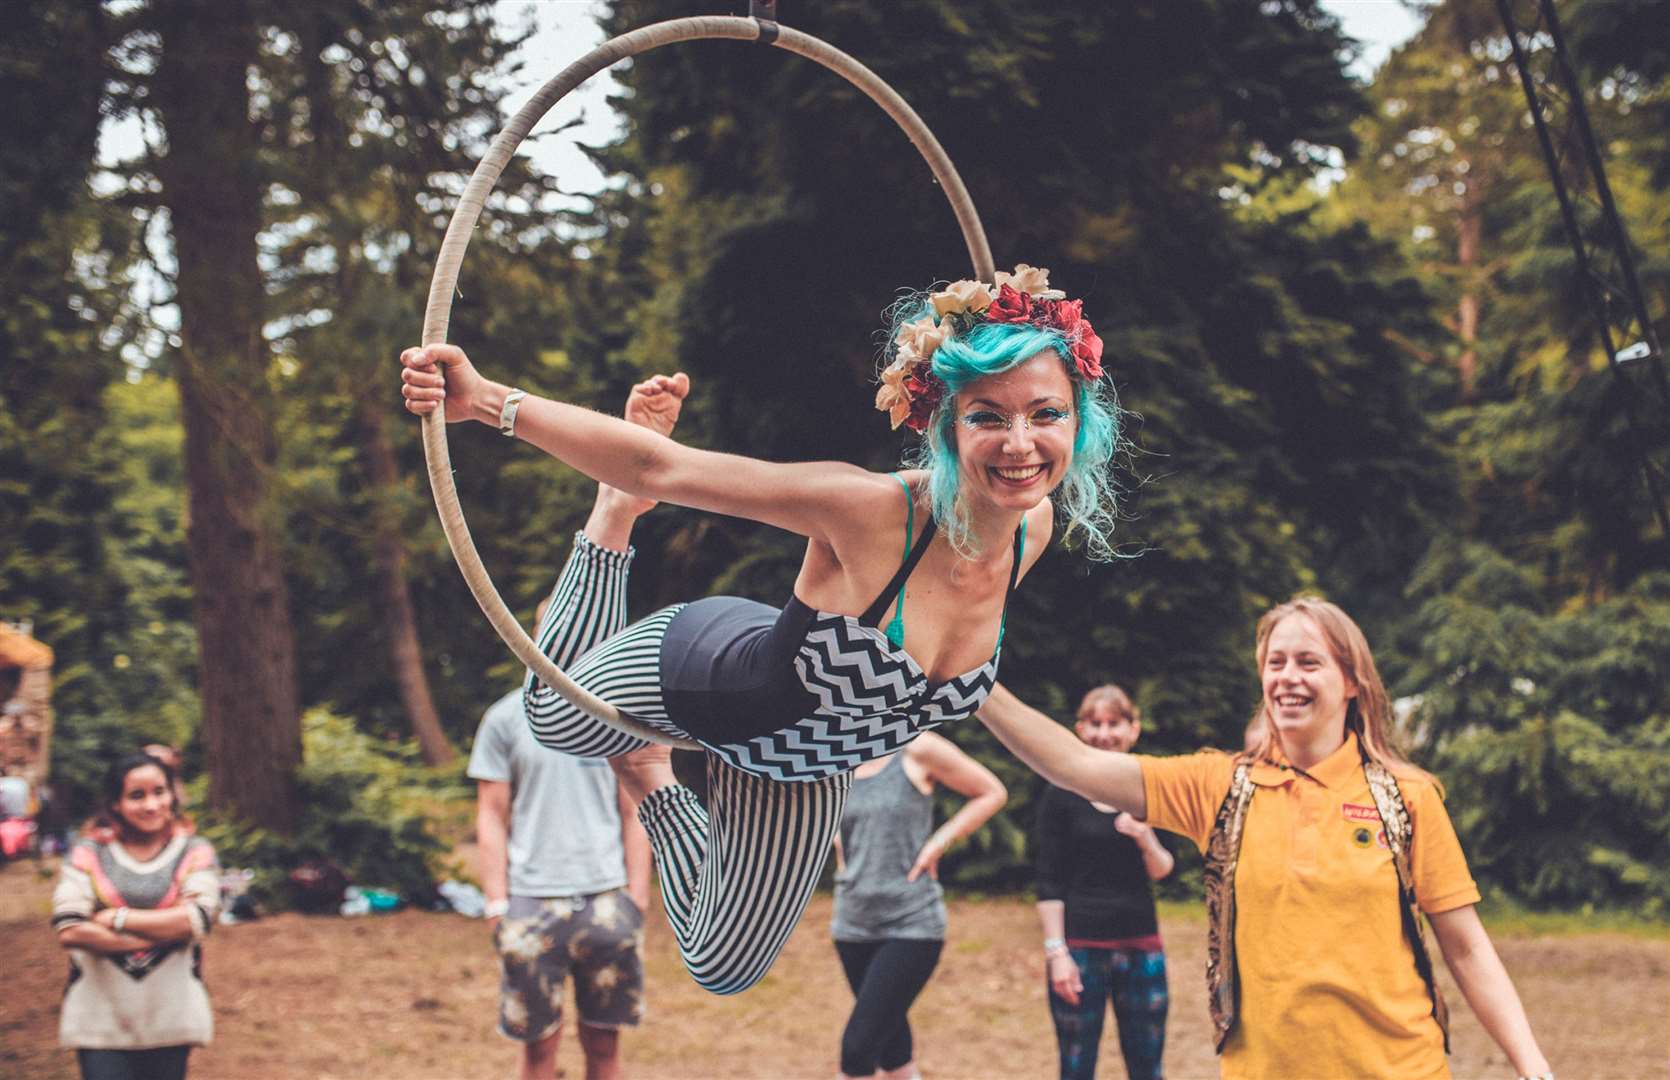 Camp Wildfire will have circus skills workshops